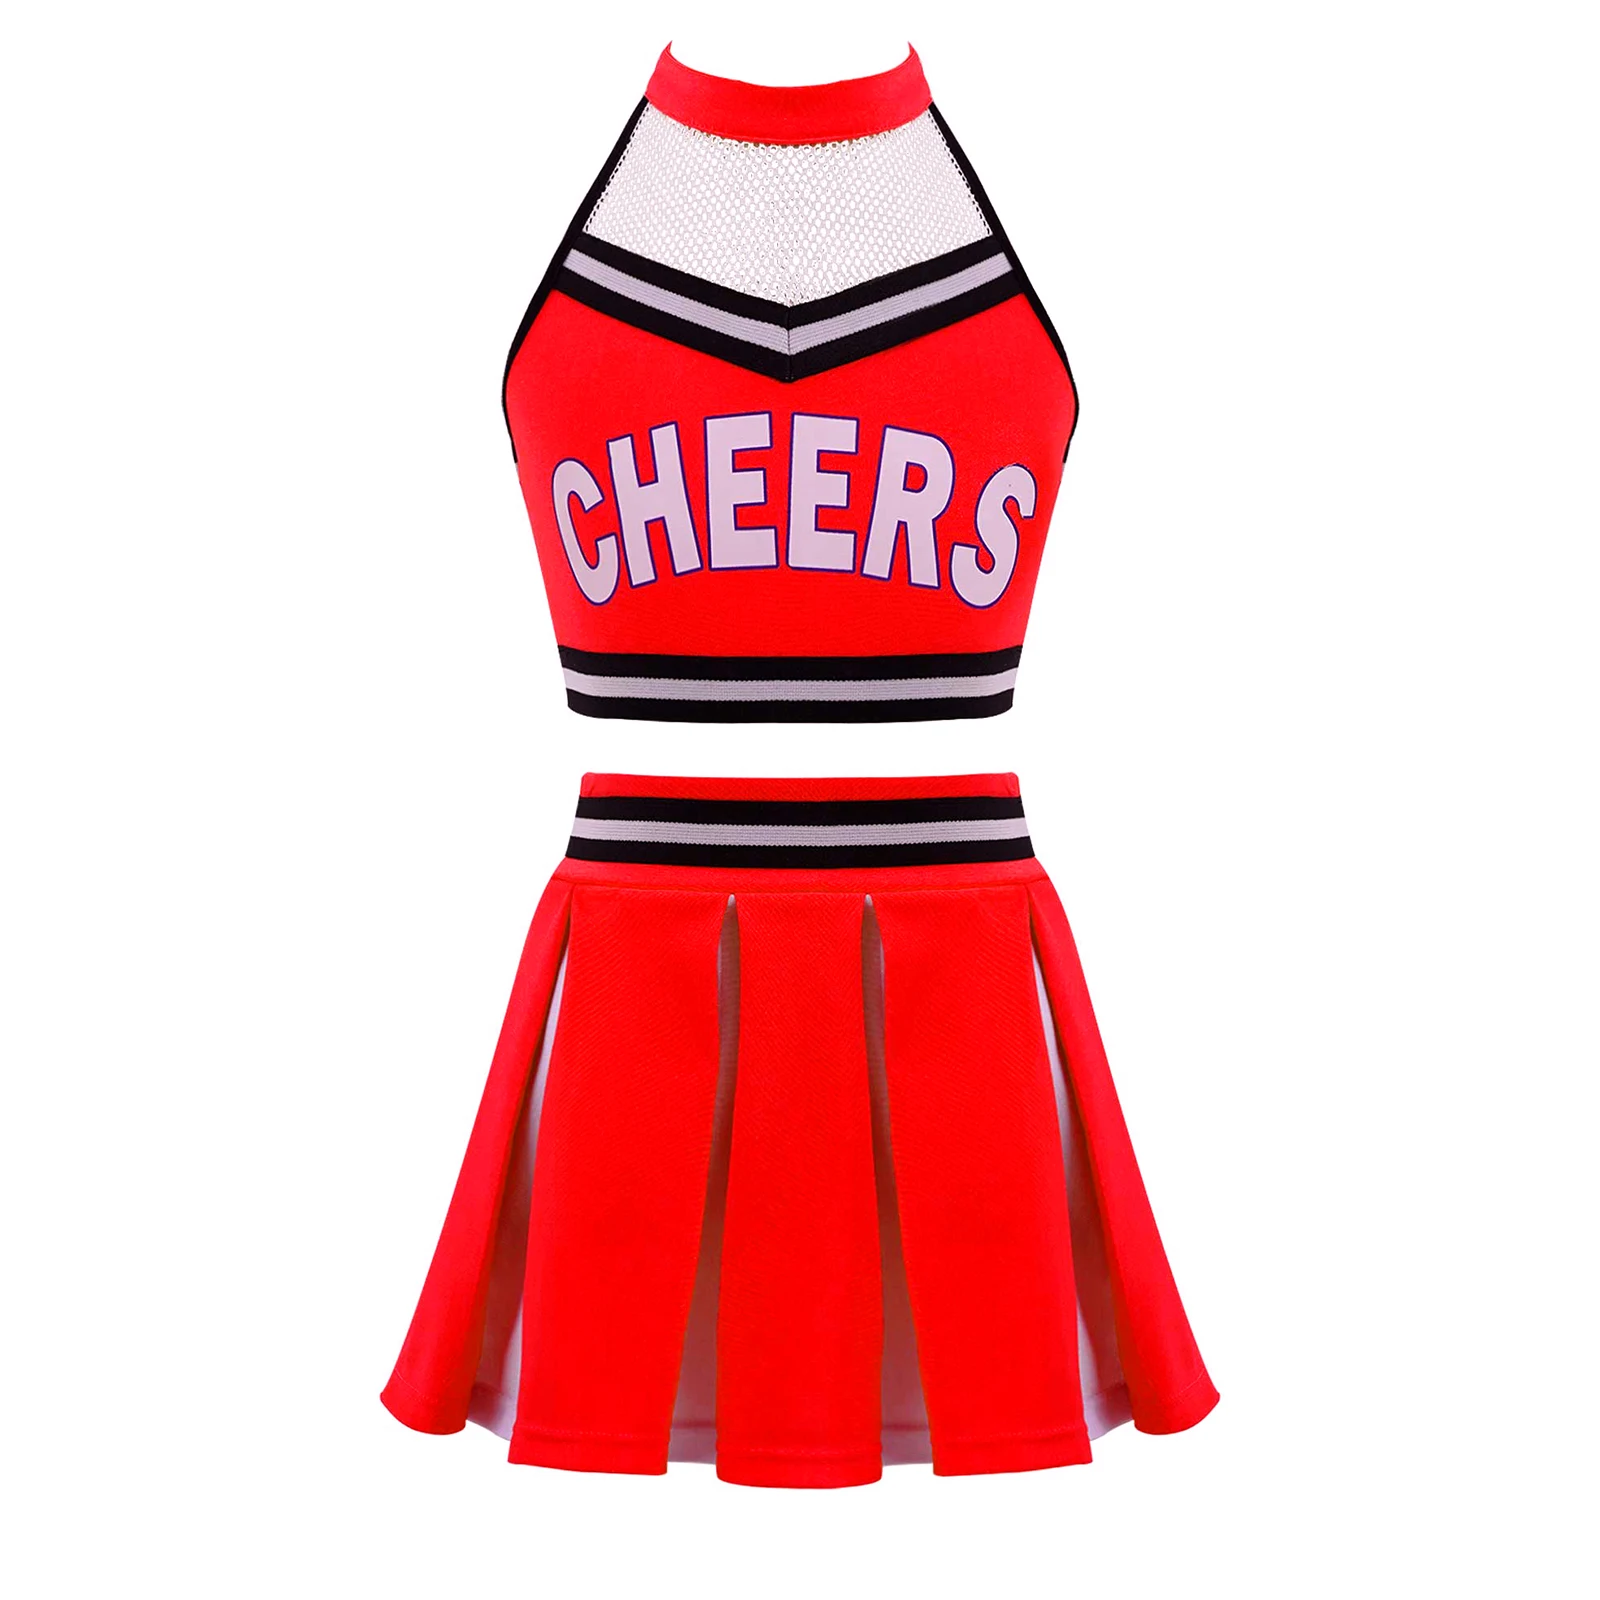 Cheerleader Costume for Girls Halloween Cute Uniform Mesh Splice Crop Top+Pleated Skirt Kids Competition Performance Outfit